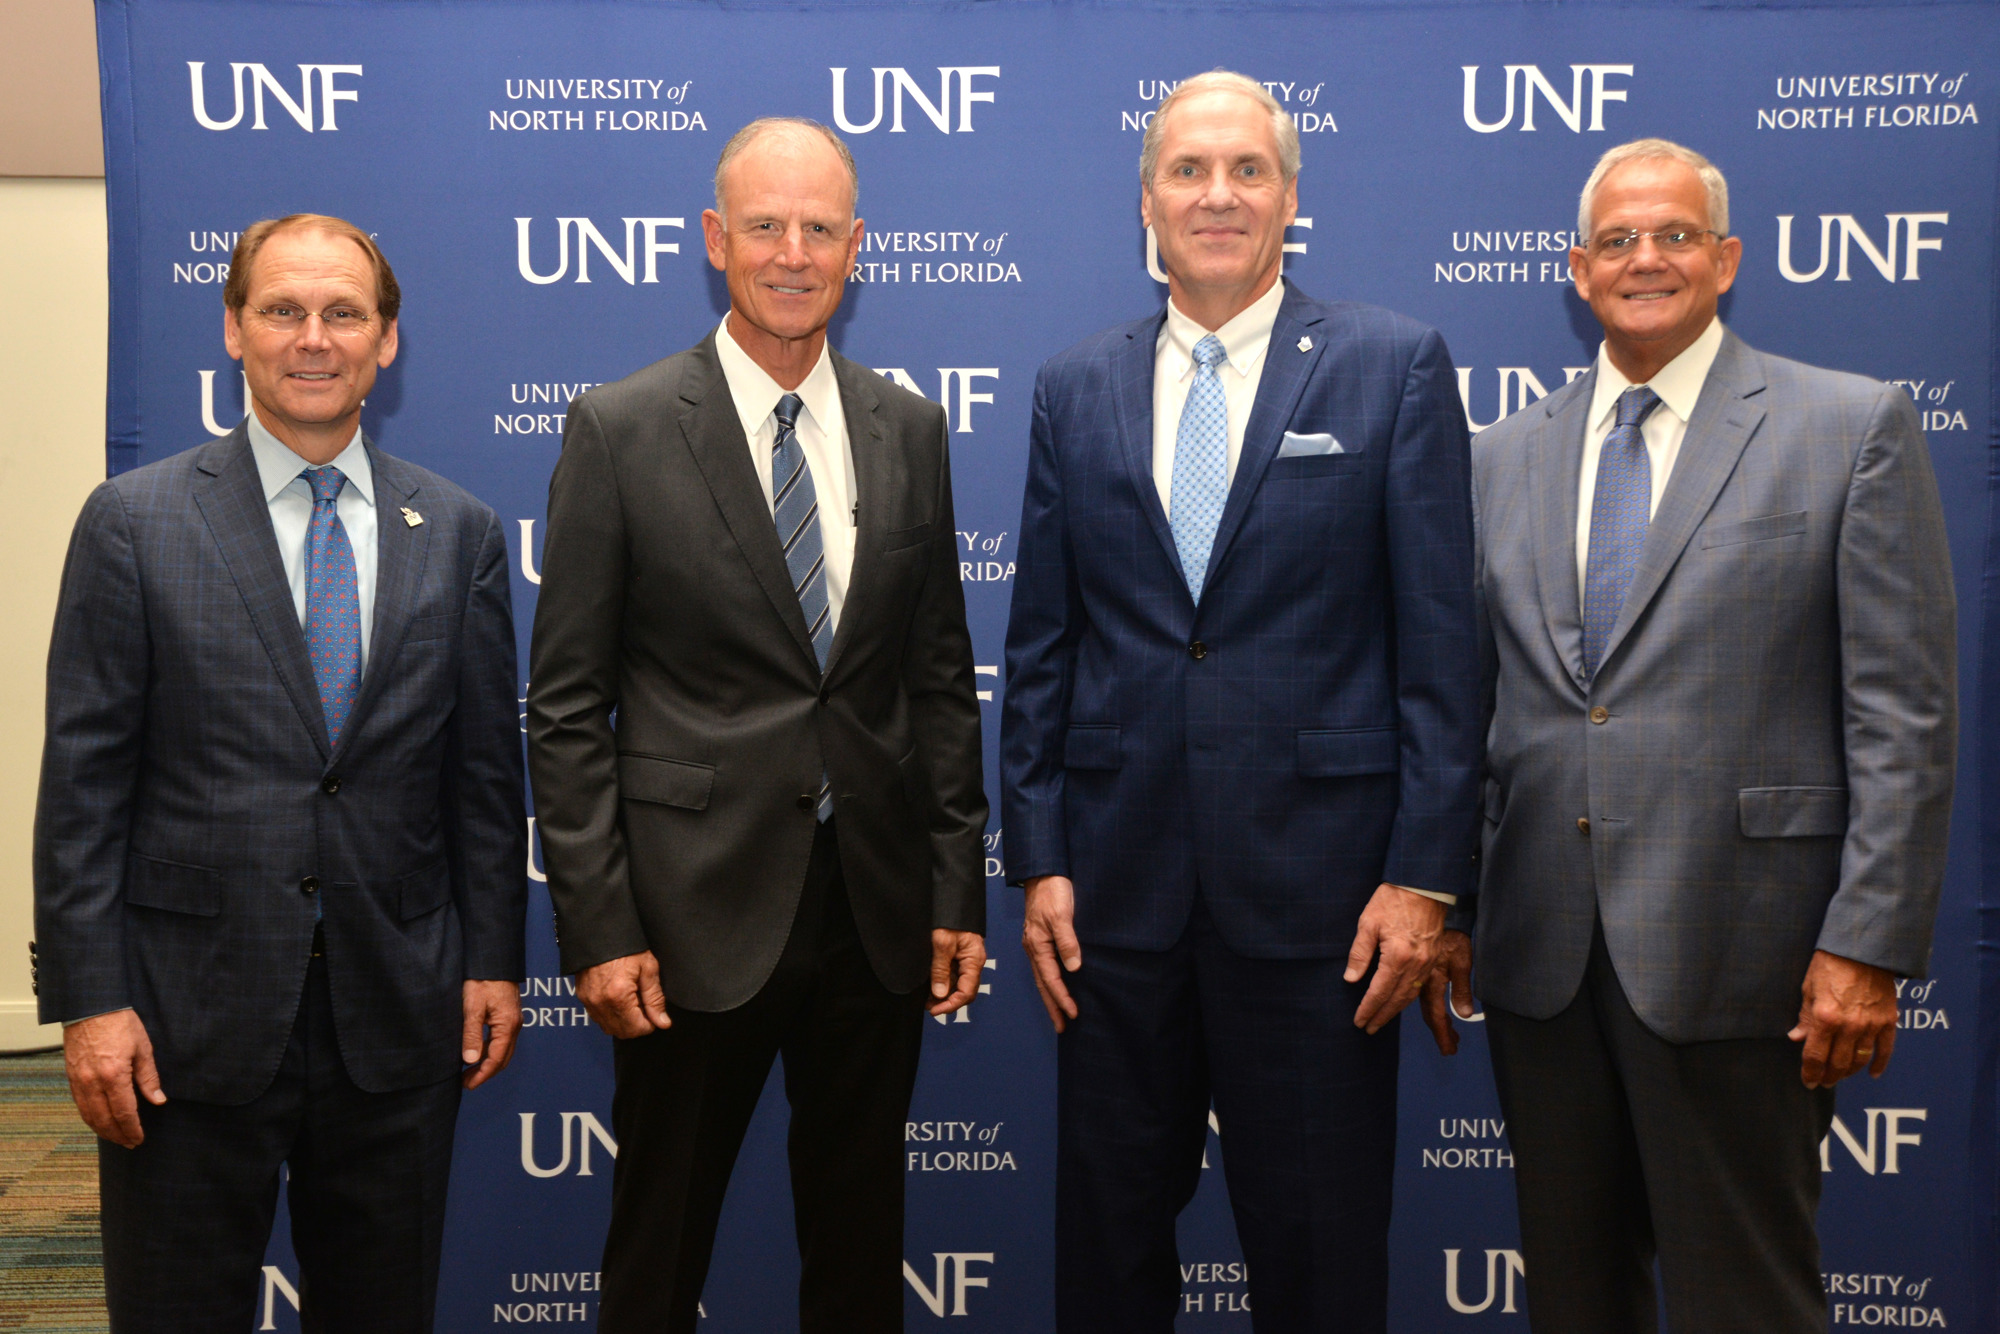 From left, Kevin Hyde, UNF board of trustees chair; Sydney Kitson, Florida State University System board of governors chair; UNF President David Szymanski; and Marshall M. Criser, Florida State University System chancellor.